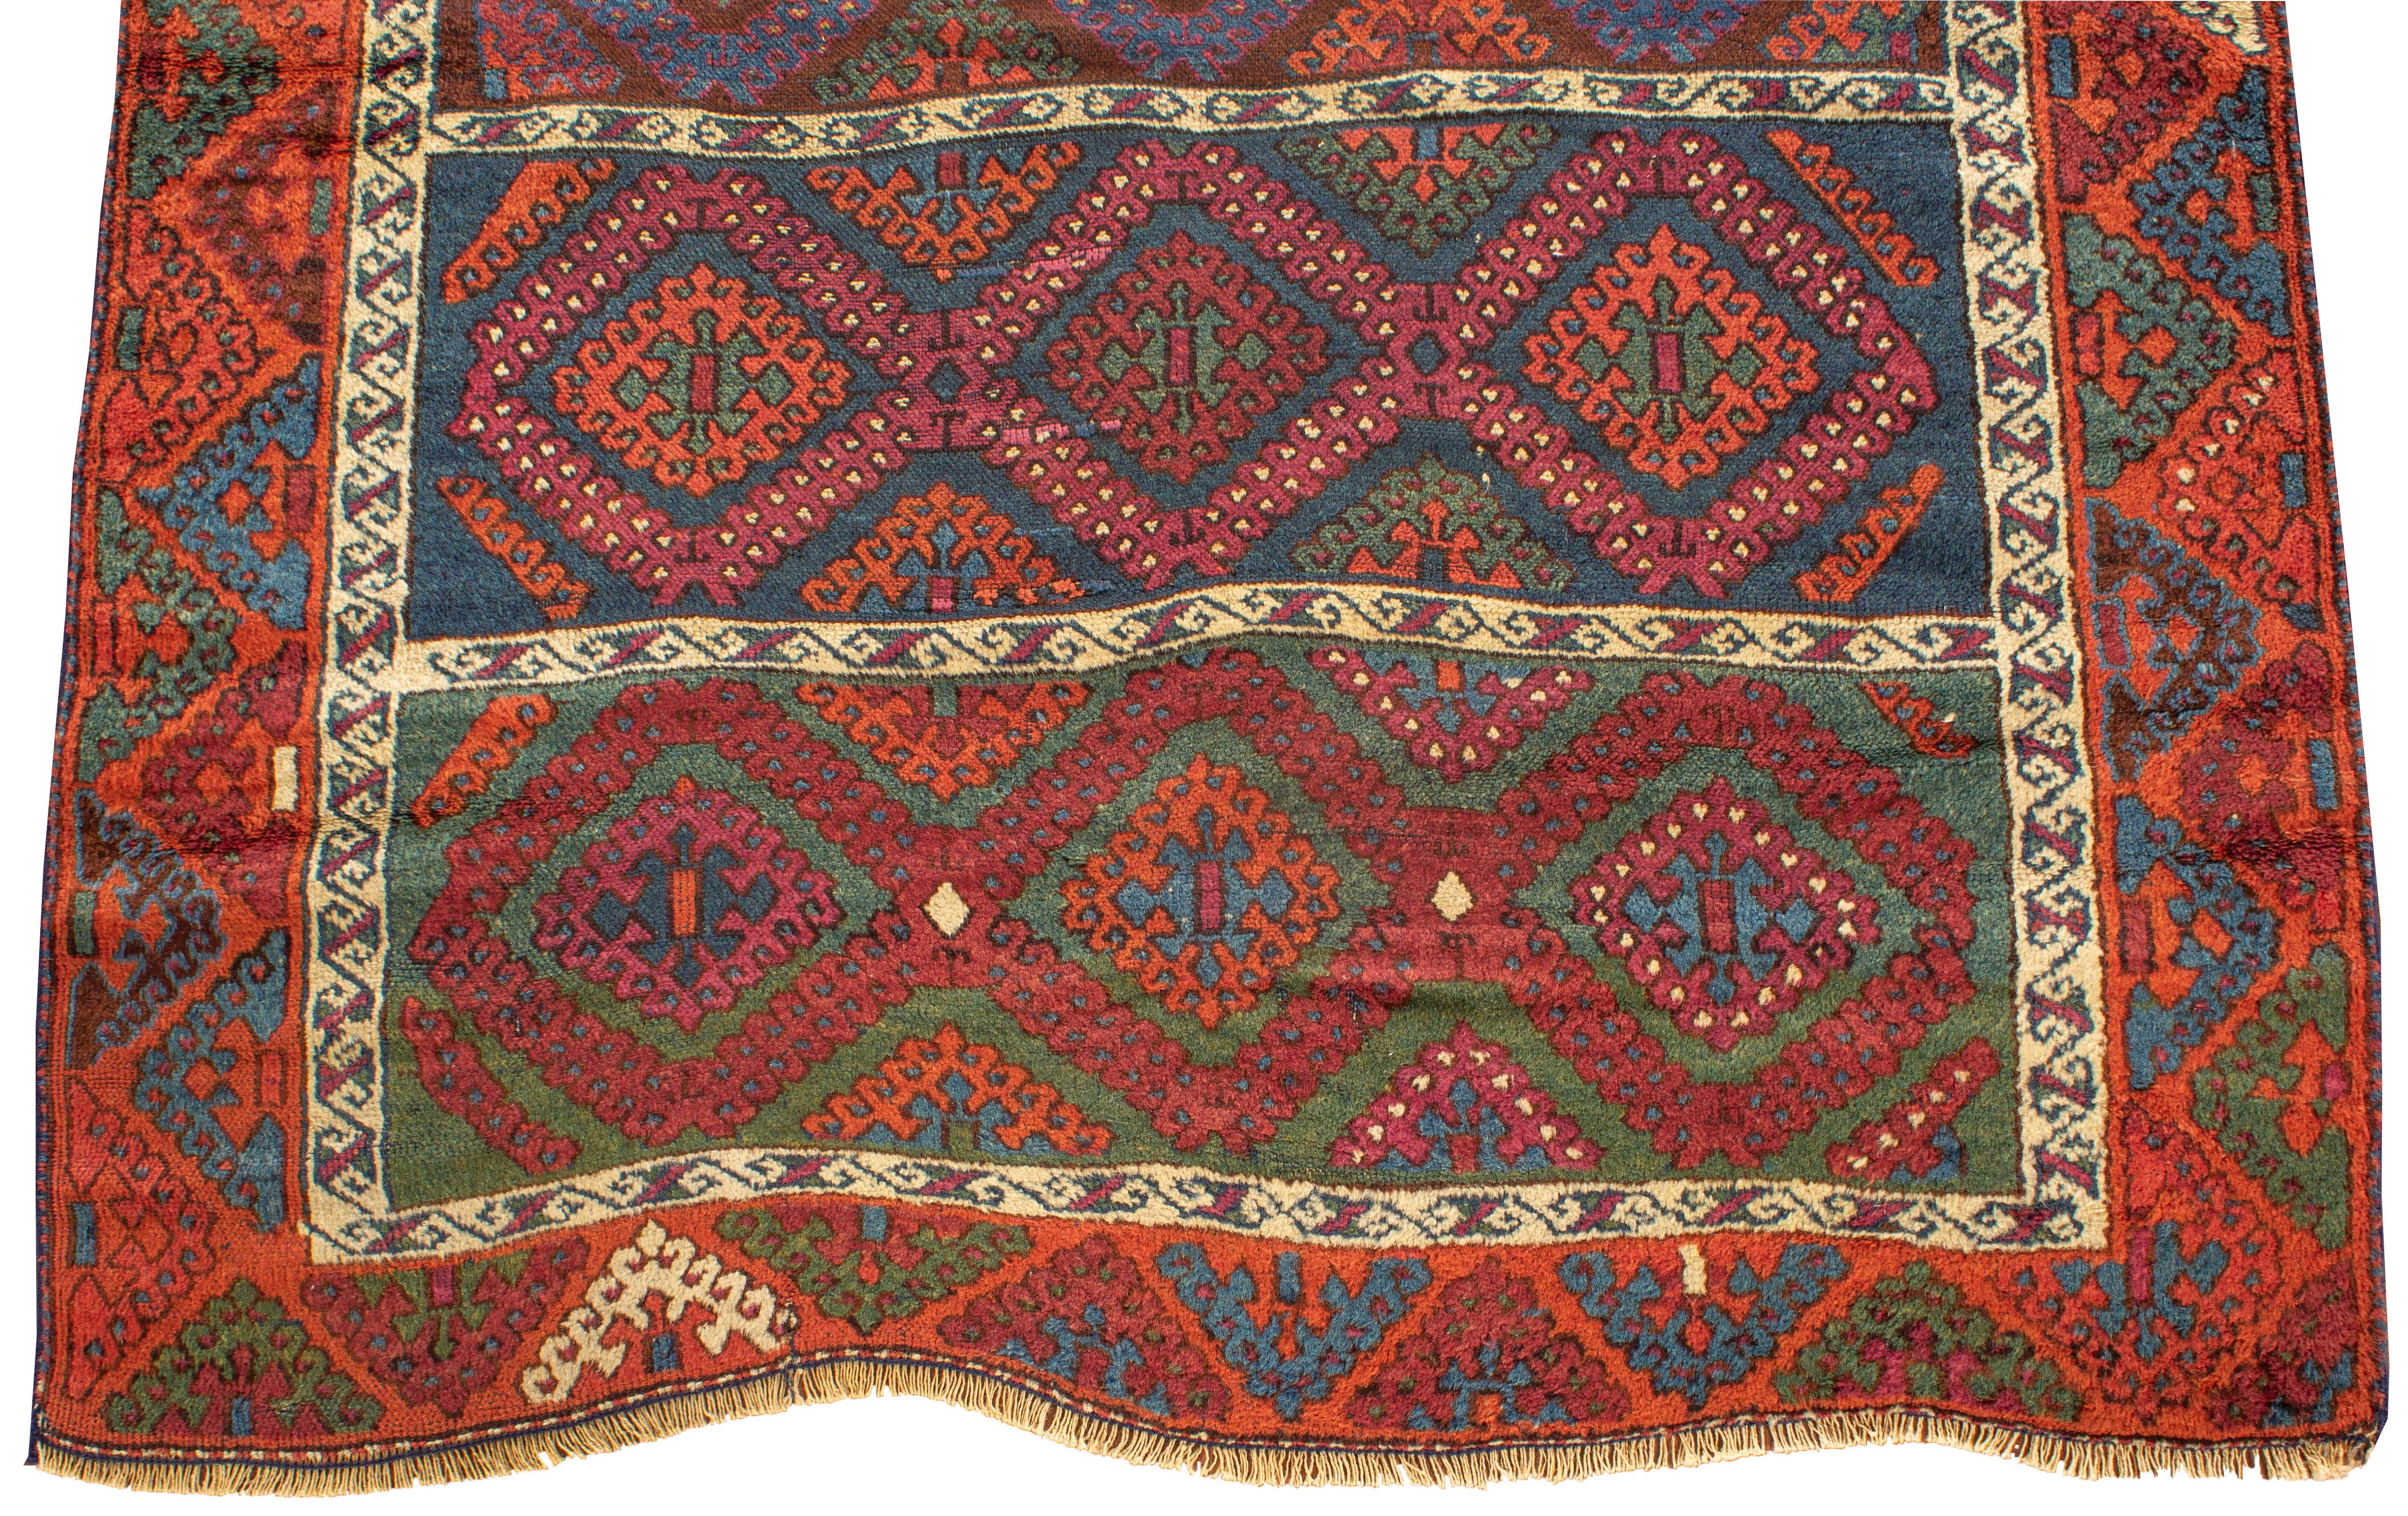 An antique Turkish Yoruk rug circa 1880. The Yoruk's are a tribal people that predate the Turkomans, primarily inhabiting the mountains of Anatolia and their weavings are detailed and difficult to find, each piece is unique. Size: 3'11 x 7'2.